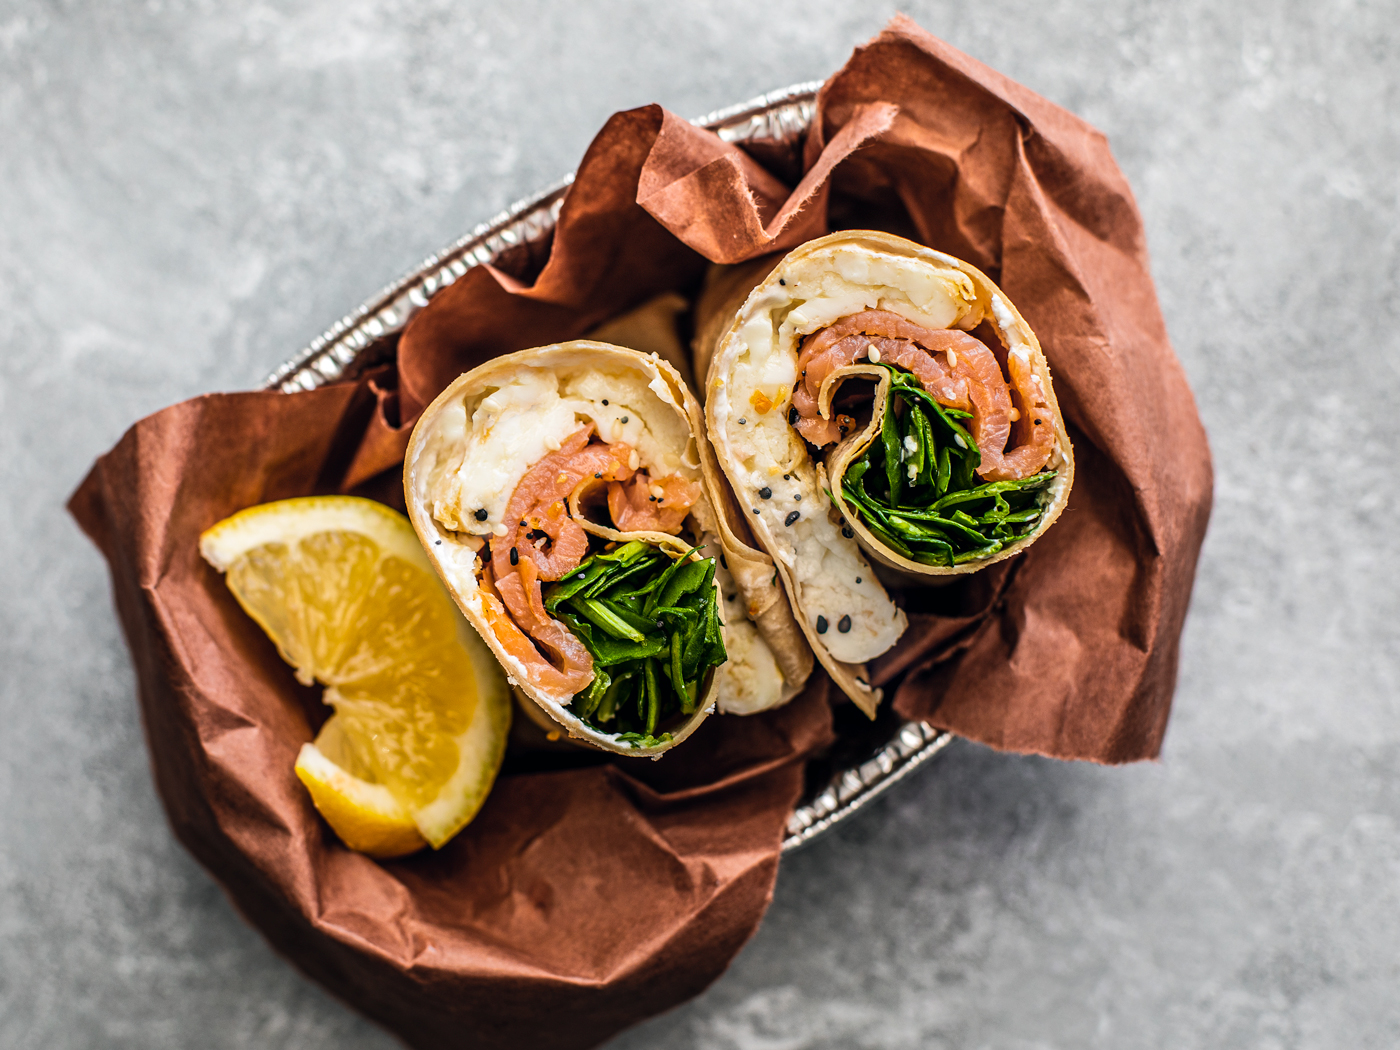 Smoked salmon wrap bundled in a serving tray with lemon wedges.